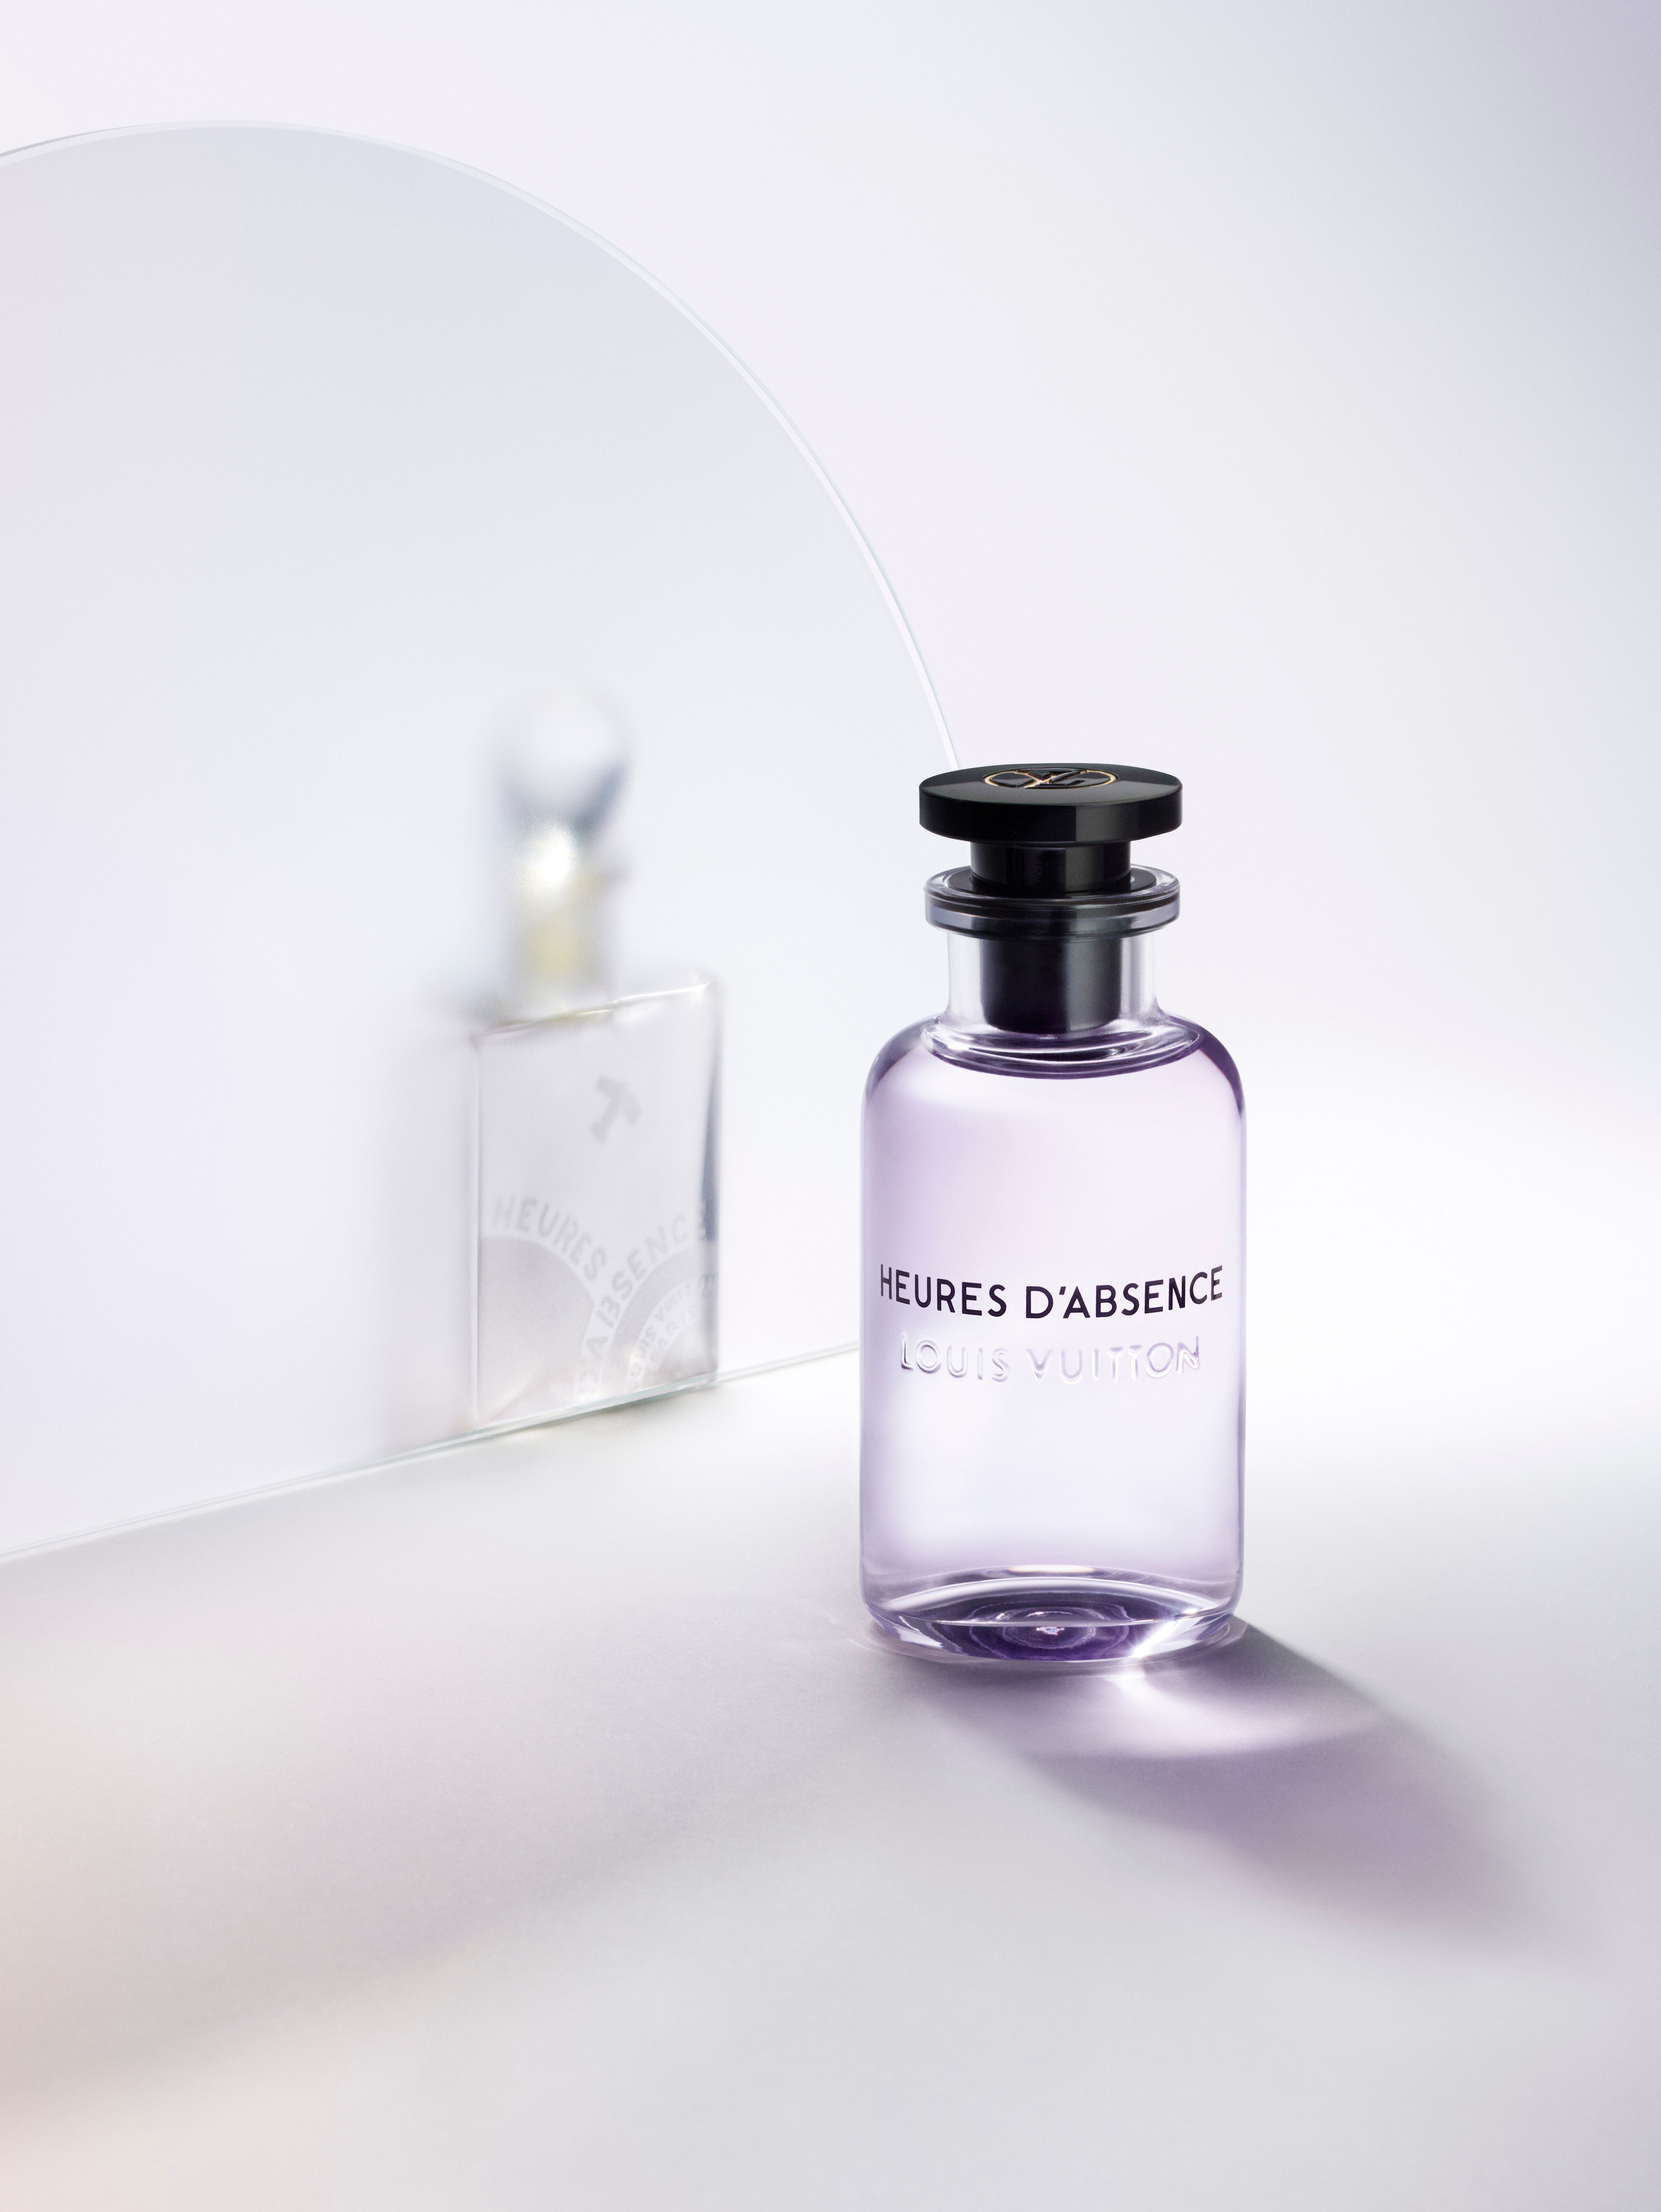 Louis Vuitton Presents its 11th Scent by Remaking the Heures D’Absence